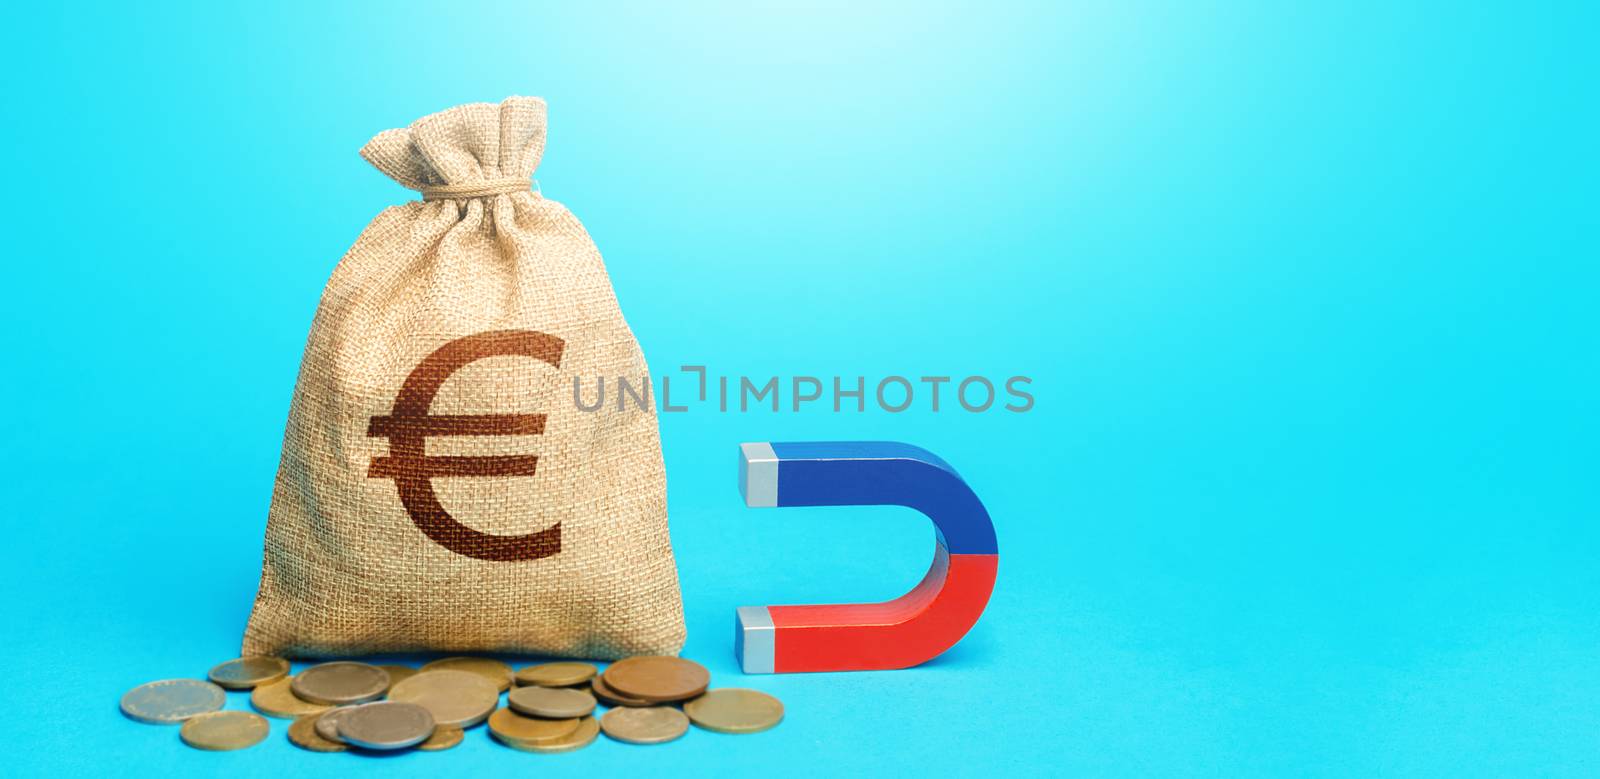 Euro money bag and magnet. Raising funds and investments in business projects and startups. Tax collection. Take part in tenders. Accumulation and attraction of capital. Money laundering